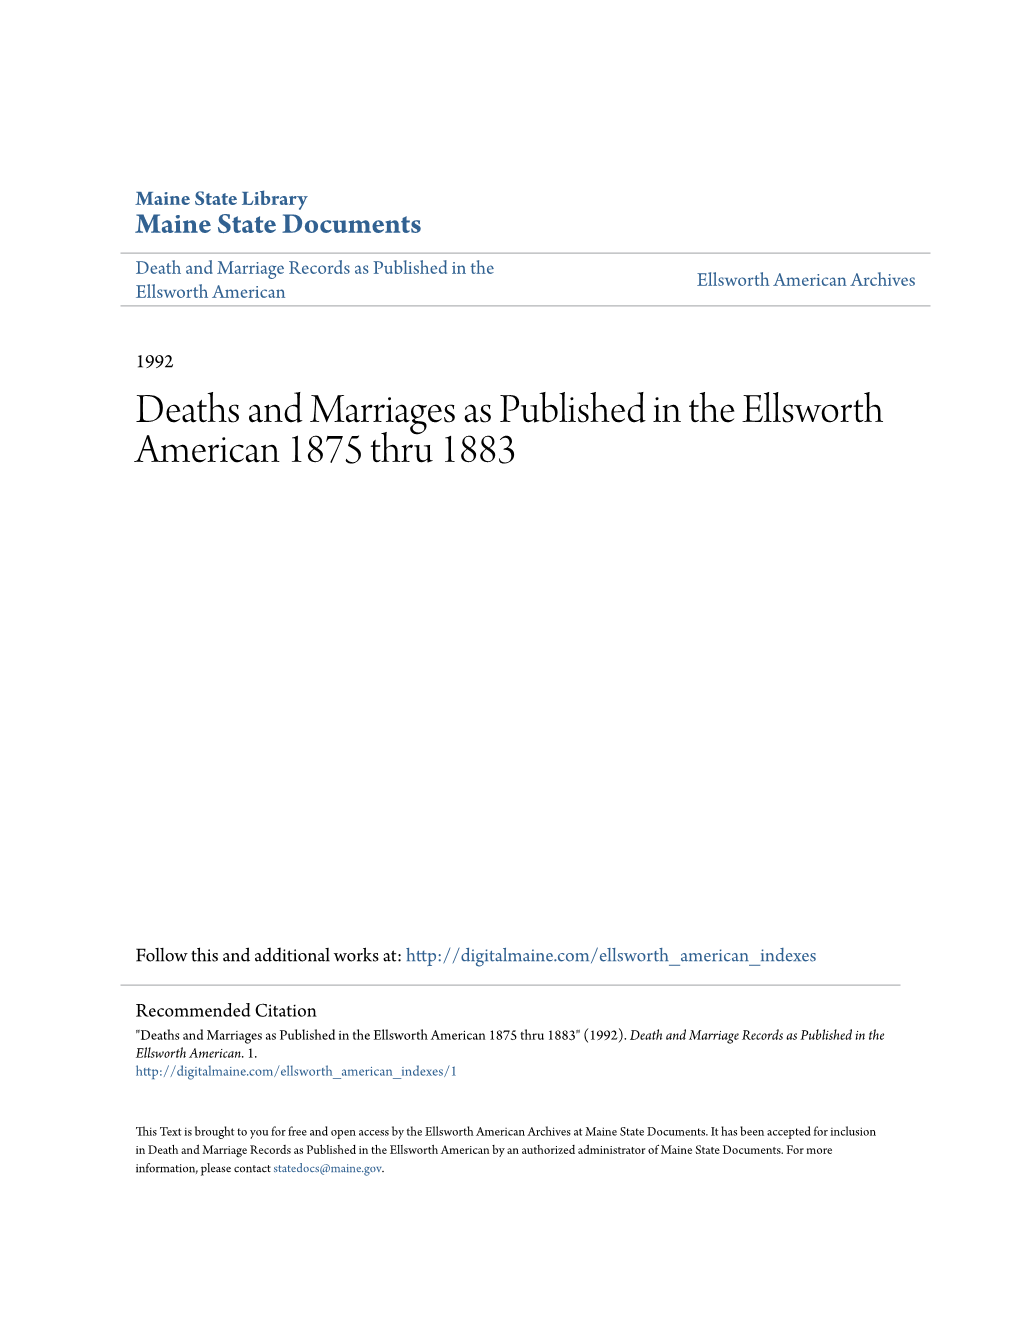 Deaths and Marriages As Published in the Ellsworth American 1875 Thru 1883